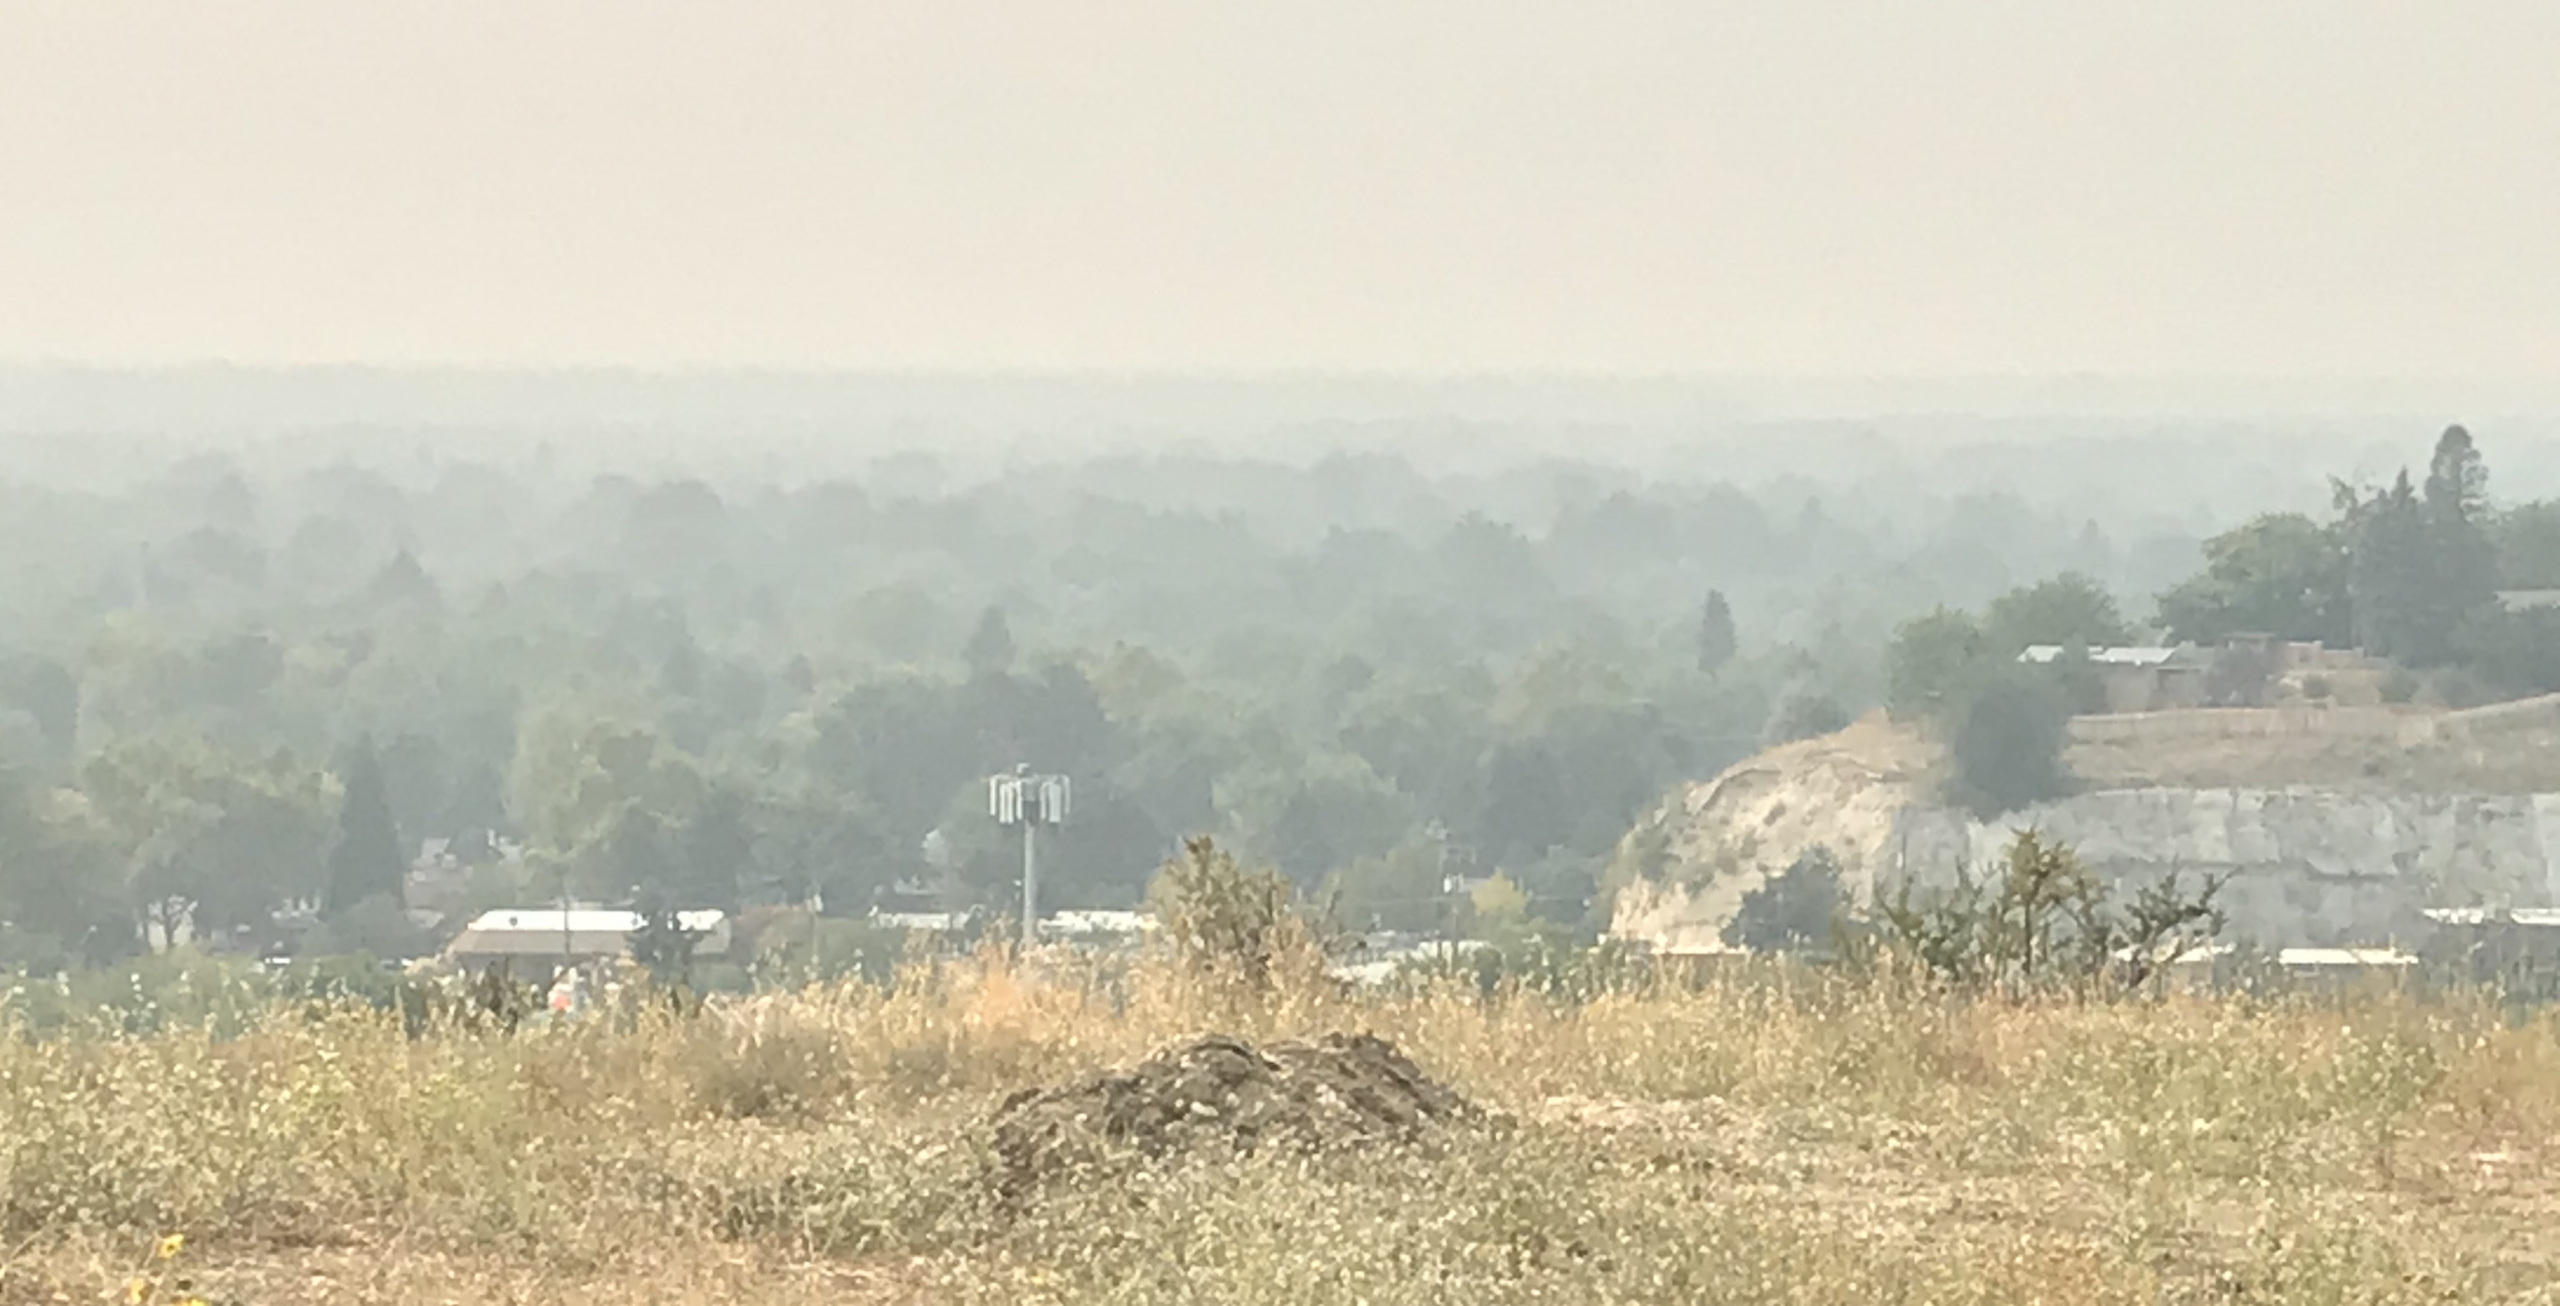 Poor air quality in Boise, ID on September 16, 2020. Staff photo.